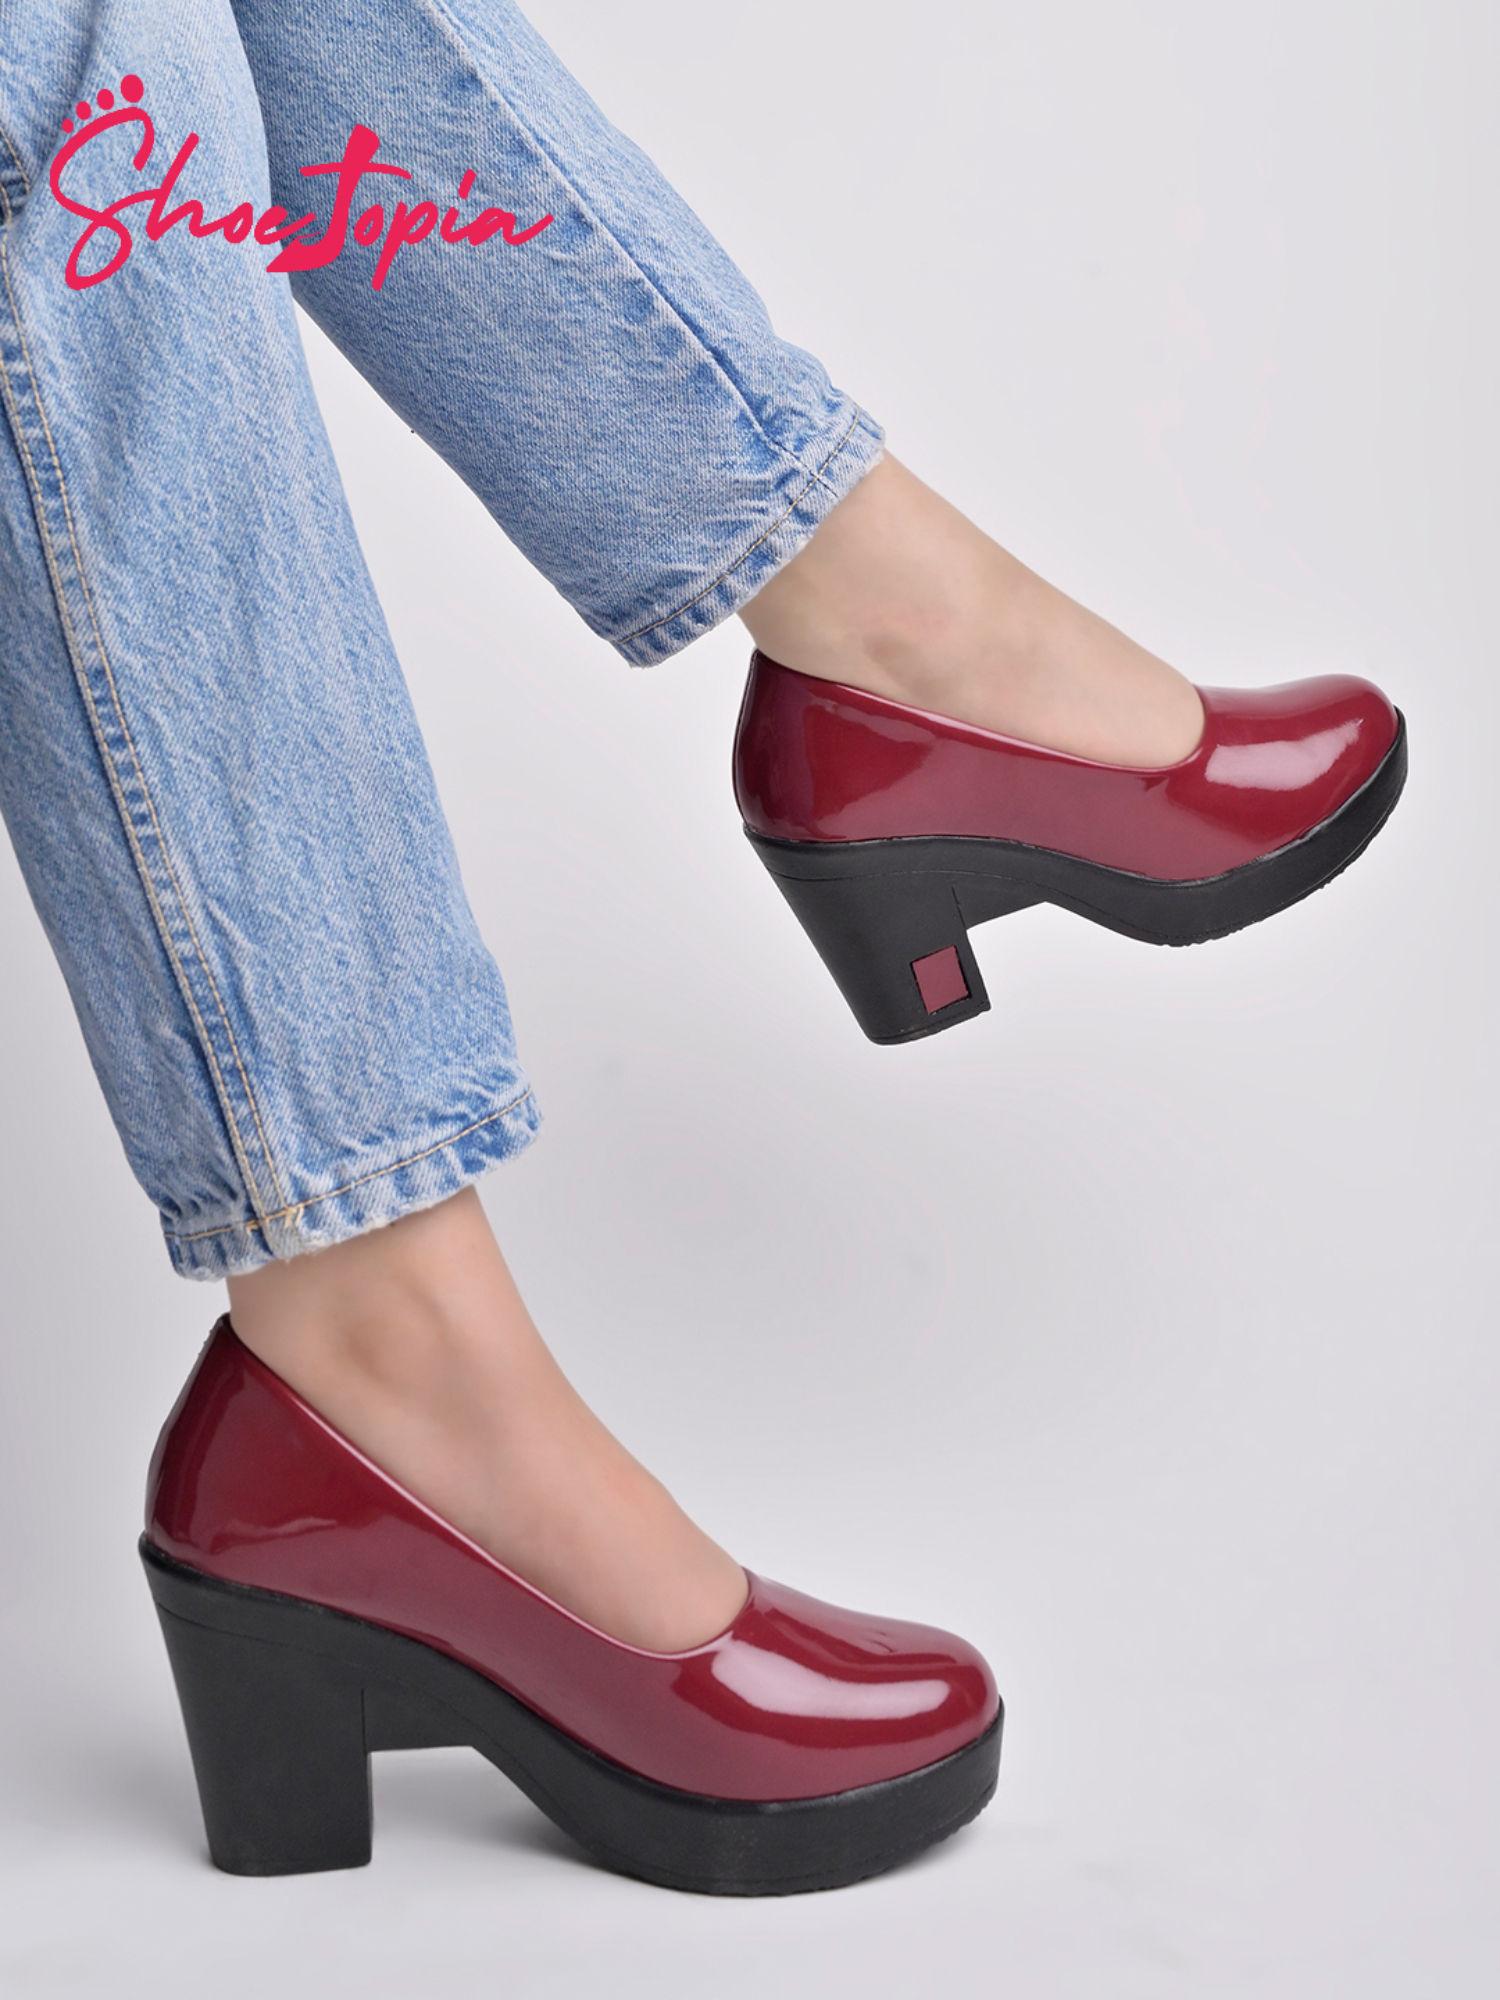 solid cherry pumps